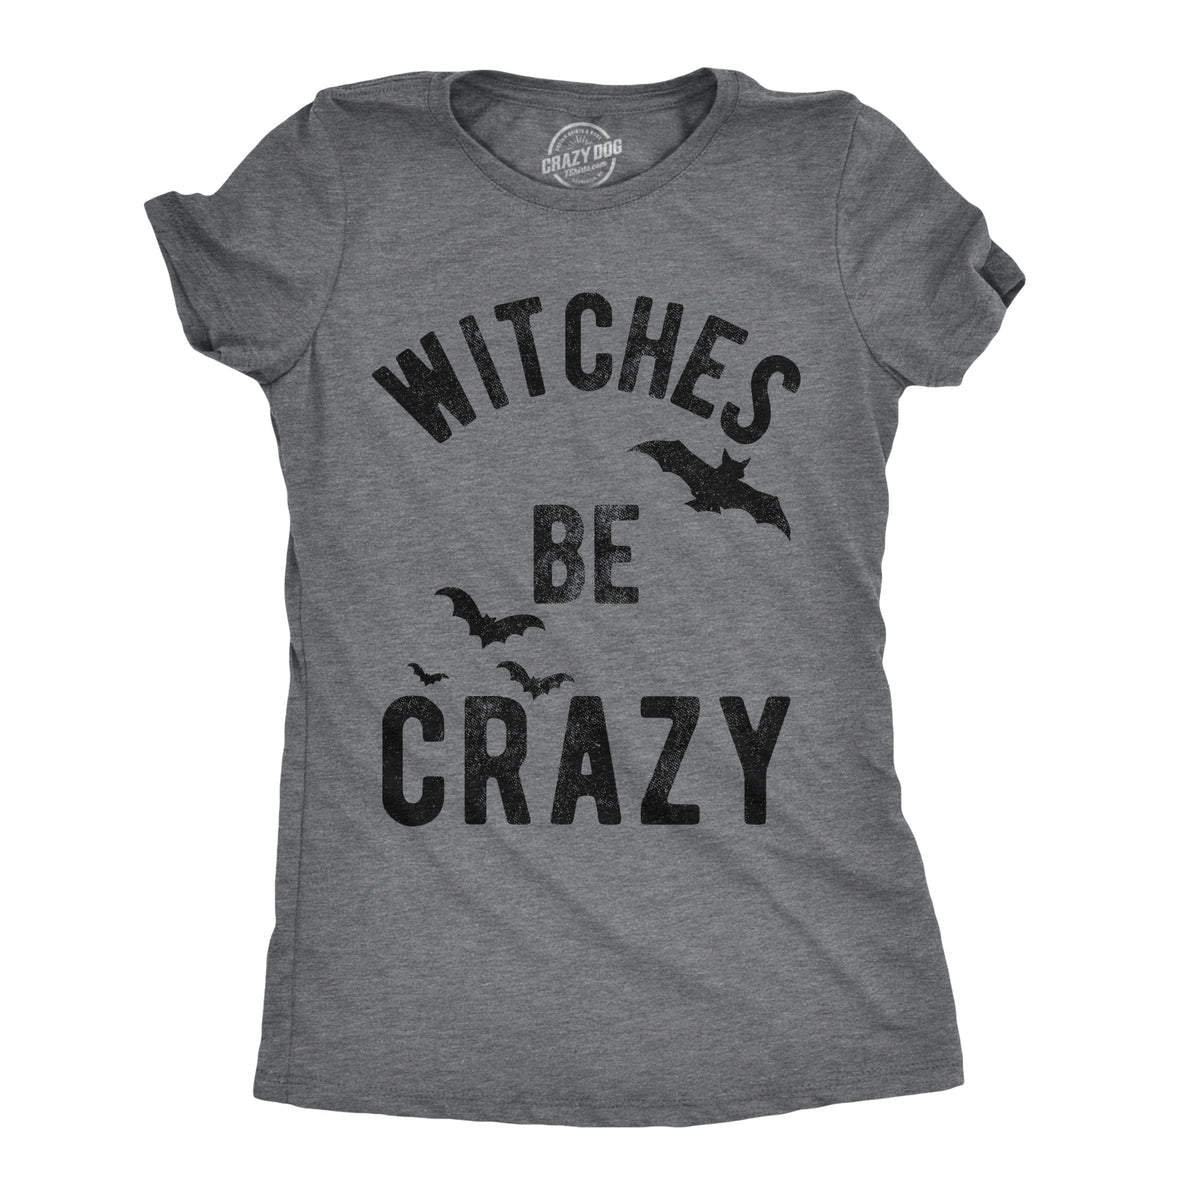 Funny Dark Heather Grey Witches Be Crazy Womens T Shirt Nerdy Halloween Tee